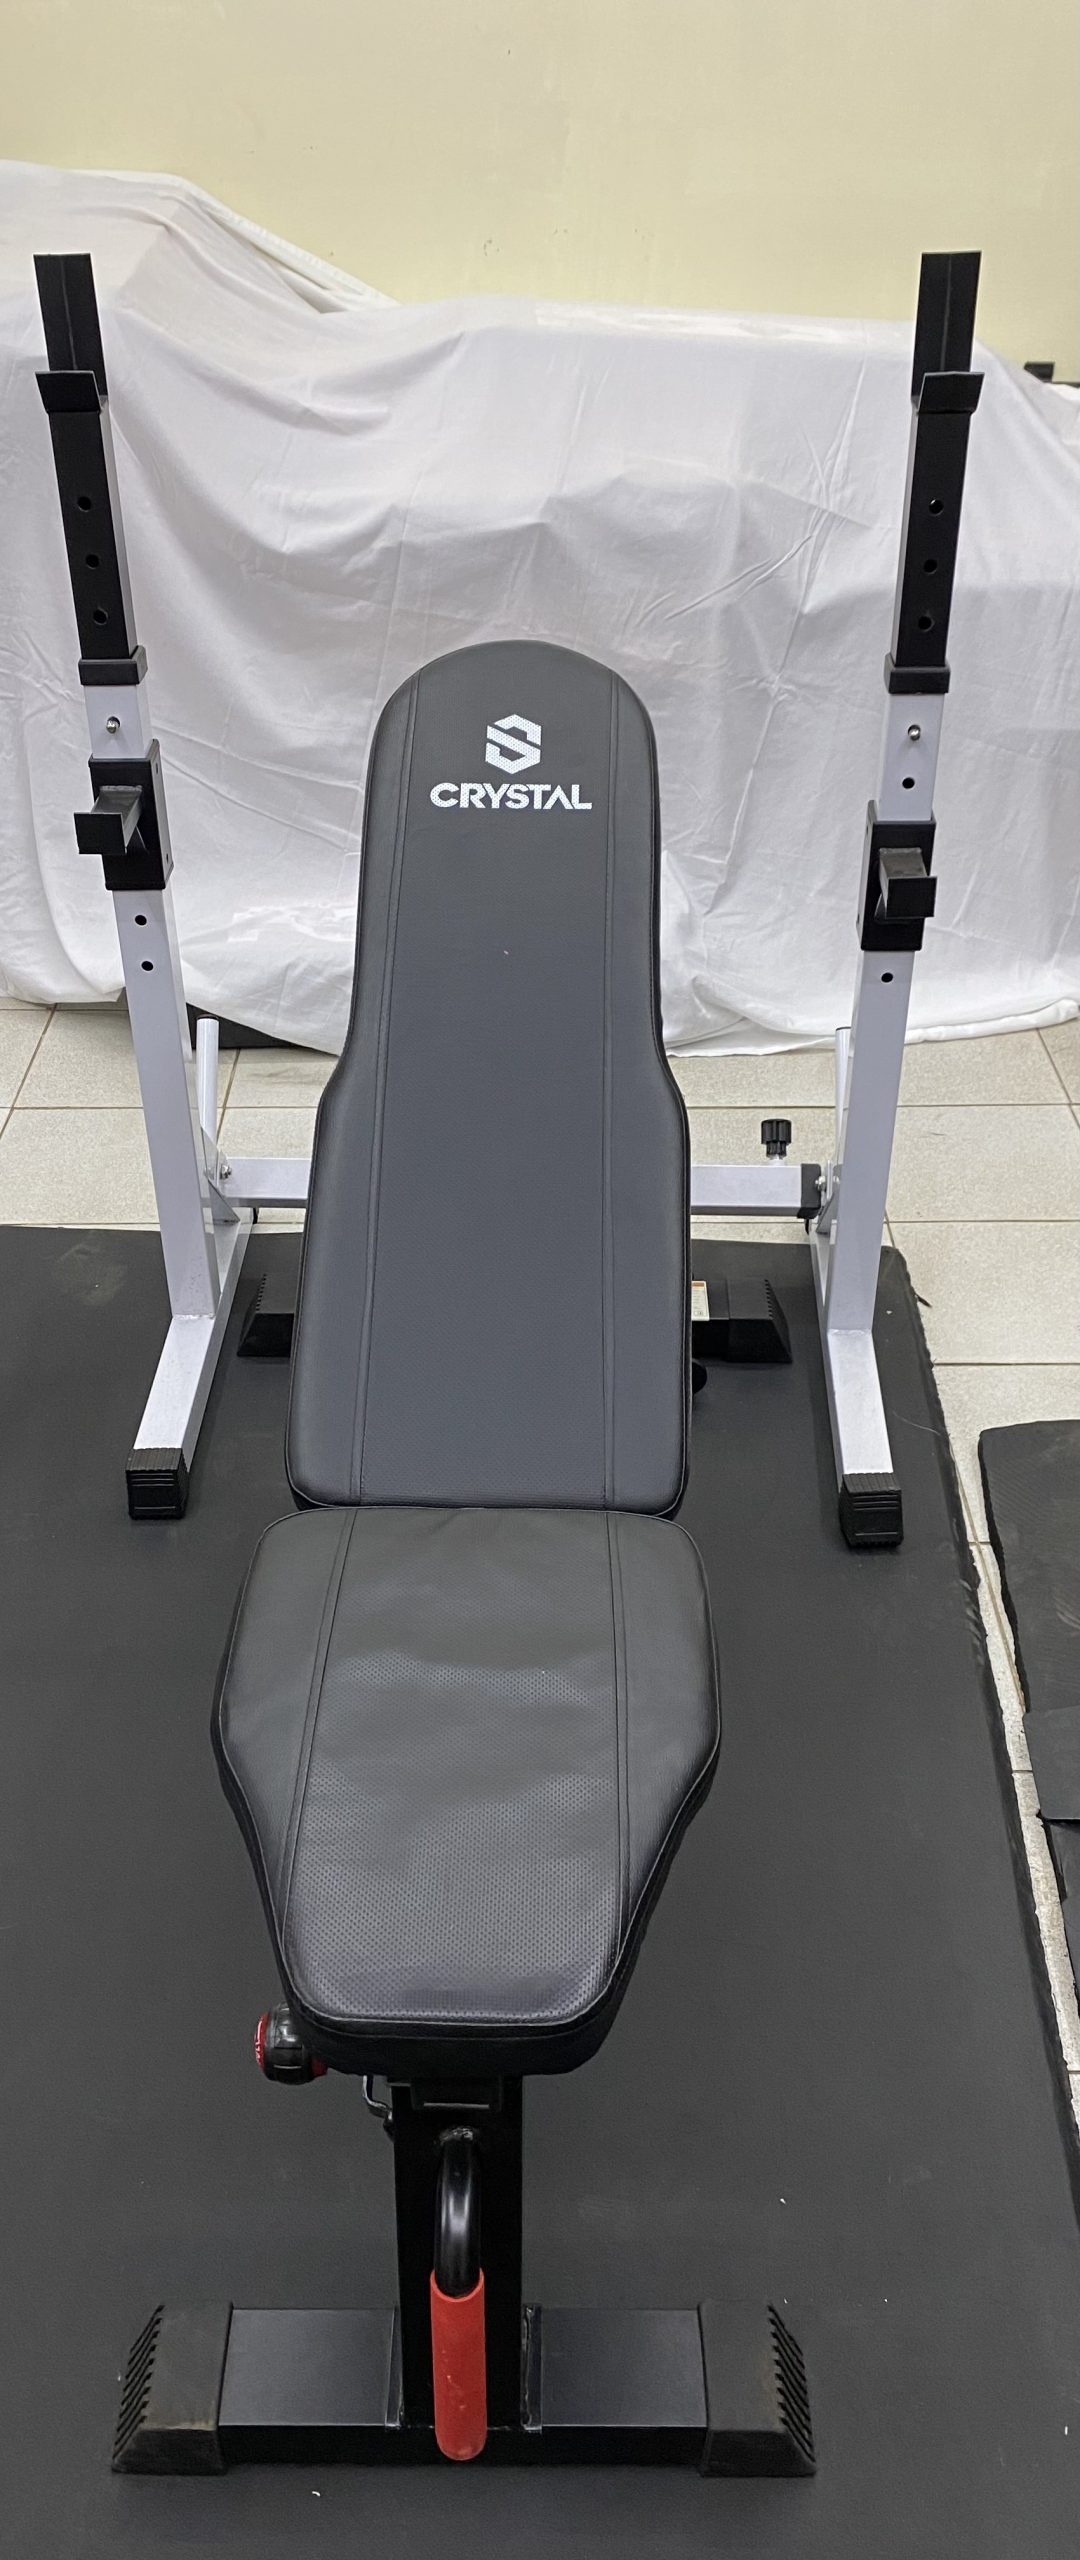 Commercial workout bench